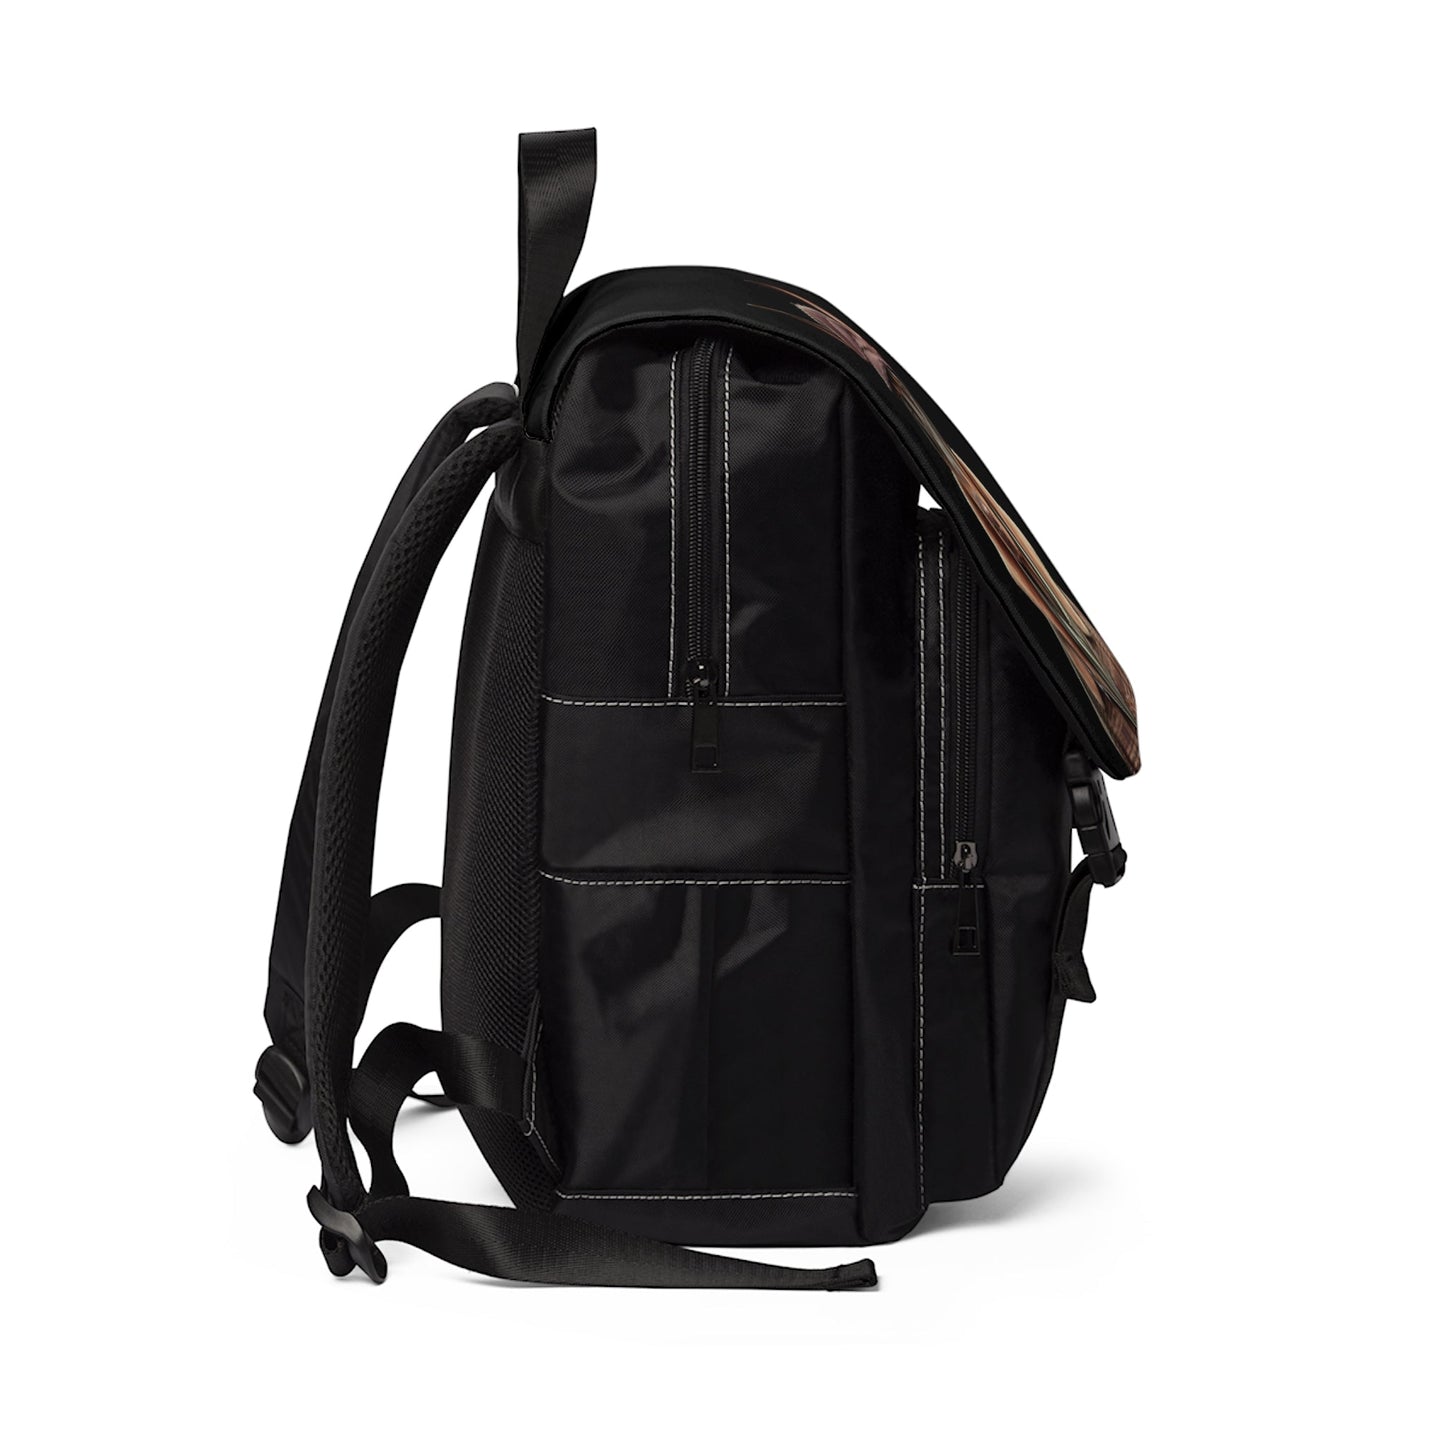 HORACE : Unisex Casual Shoulder Backpack - Shaggy Chic